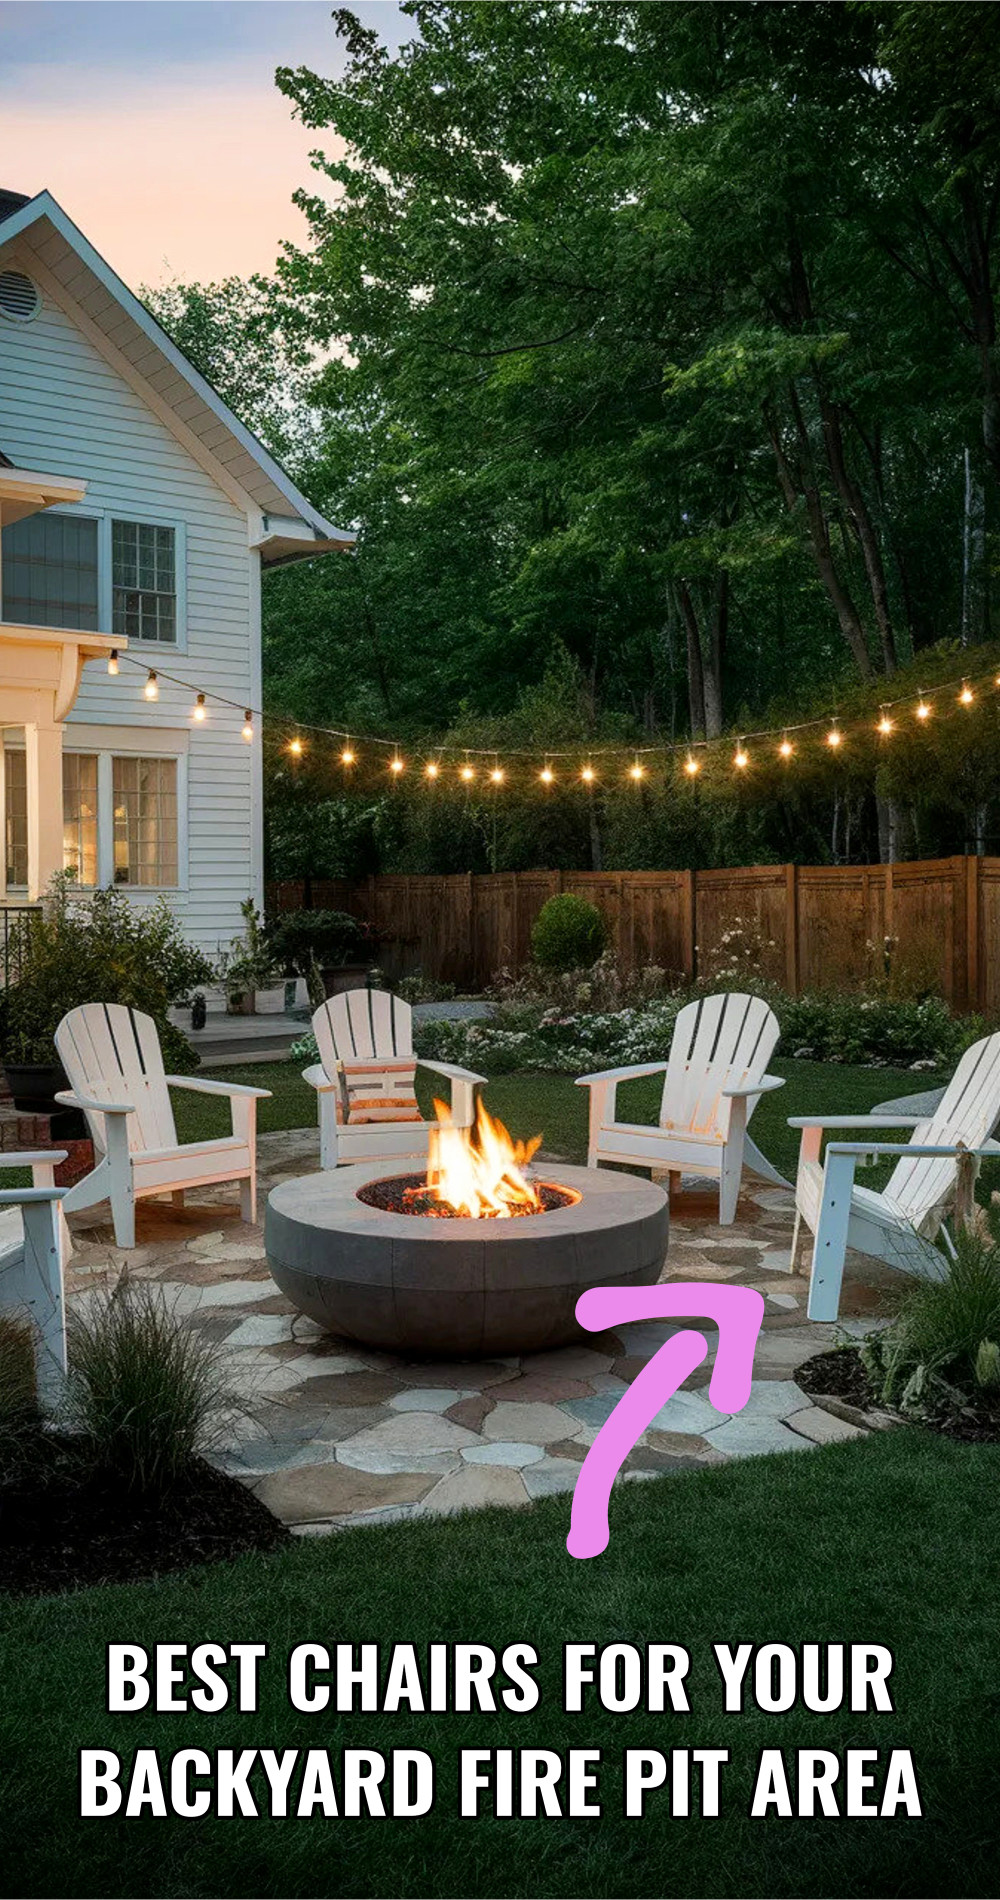 Best chairs for your backyard fire pit area